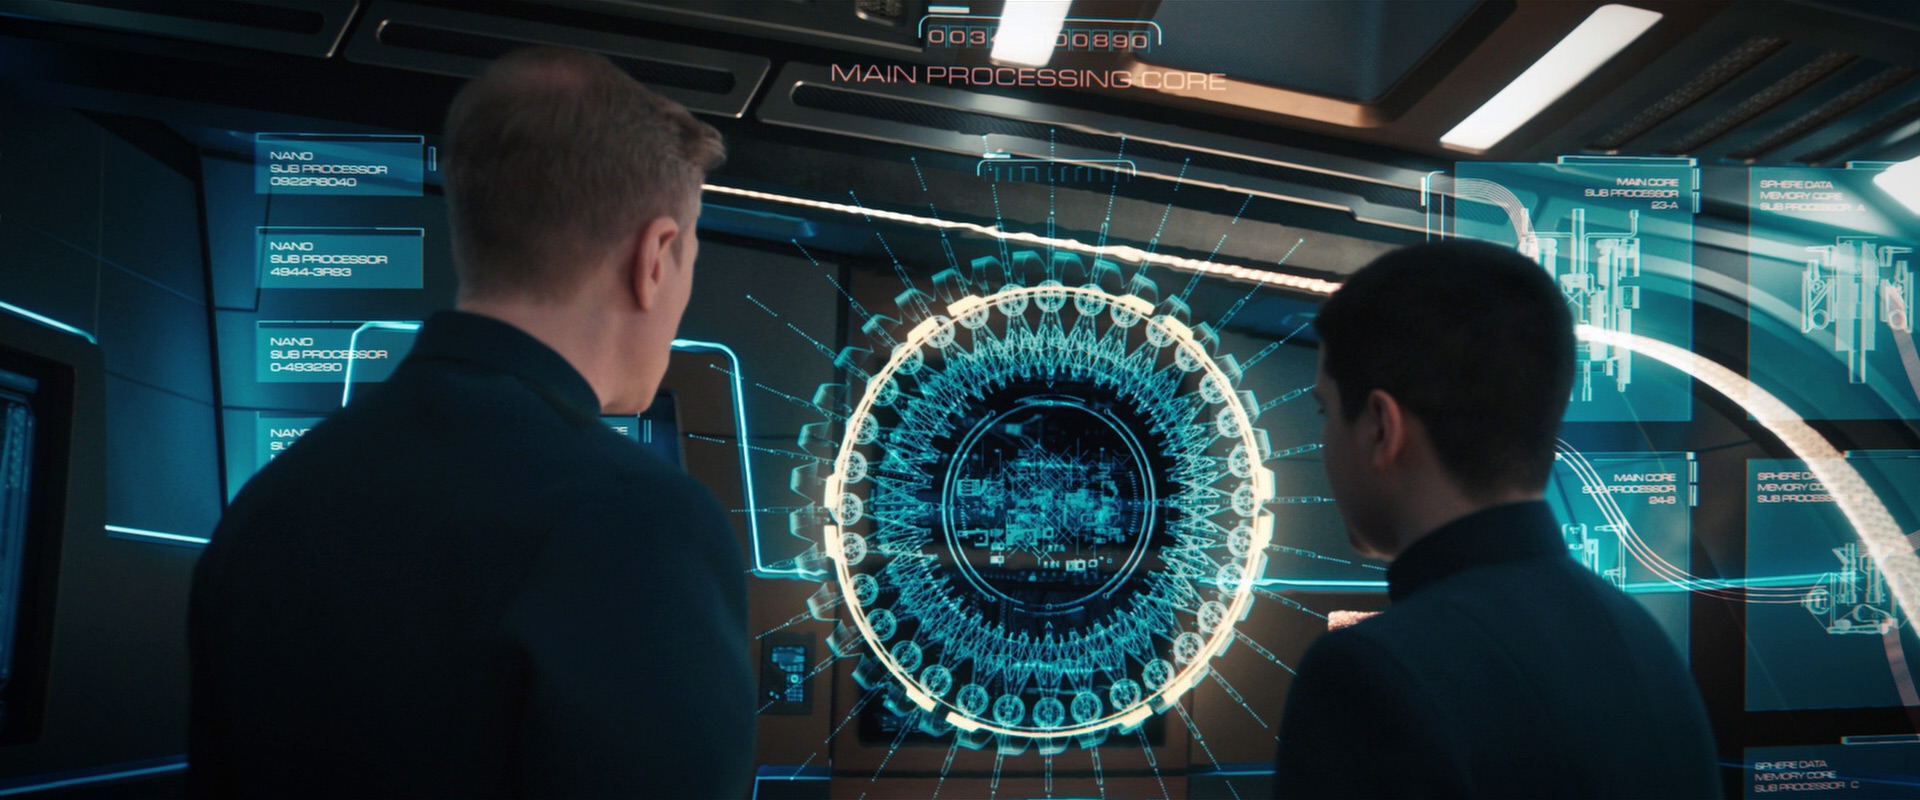 Stamets and Adira view a diagram of Zora's processing core in the Star Trek: Discovery episode "...But to Connect"